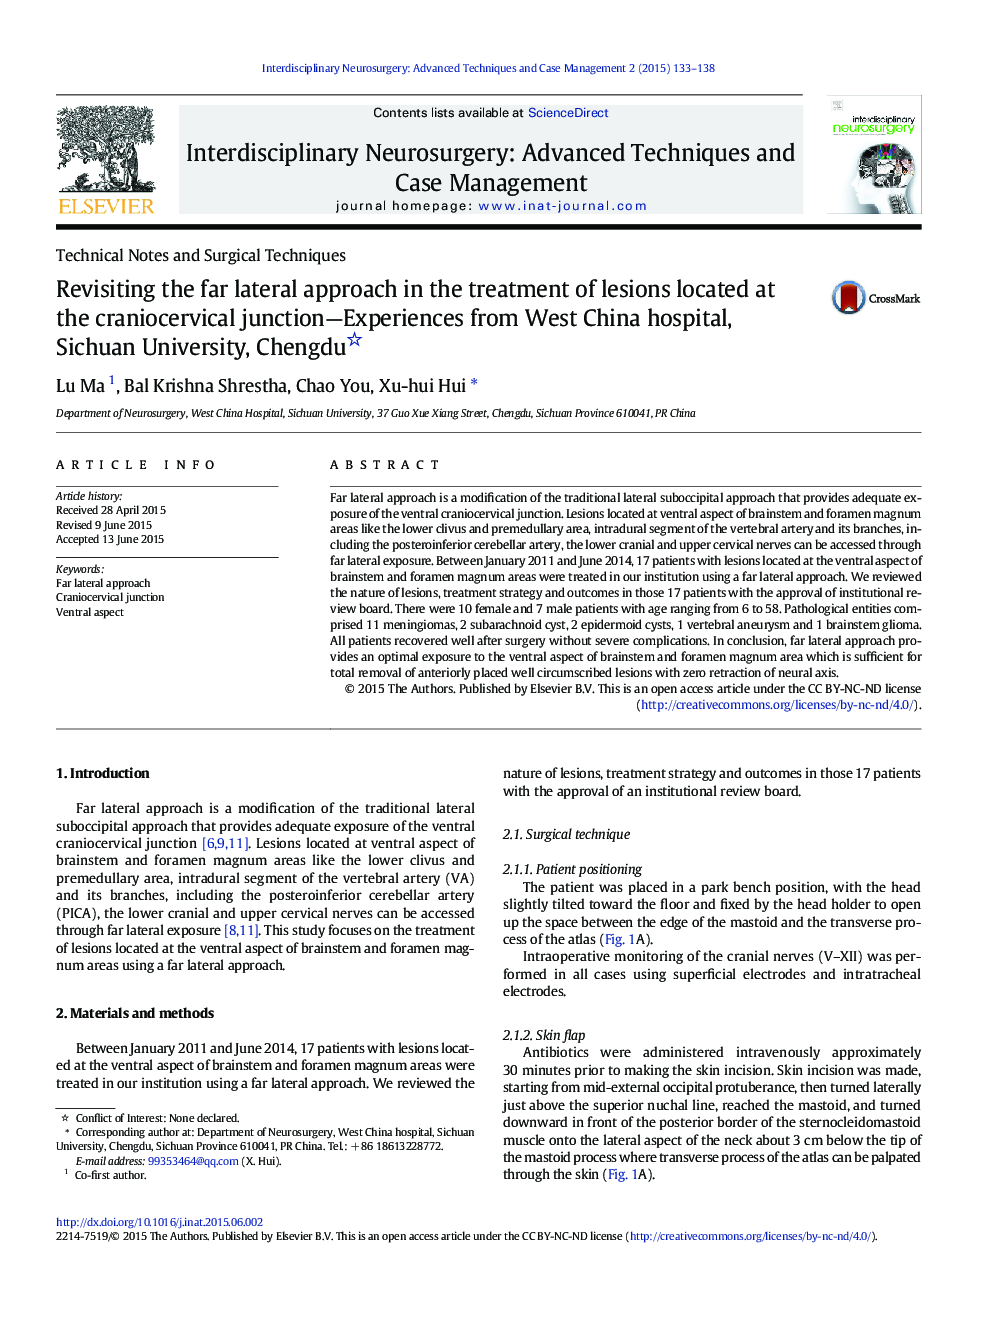 Revisiting the far lateral approach in the treatment of lesions located at the craniocervical junction—Experiences from West China hospital, Sichuan University, Chengdu 